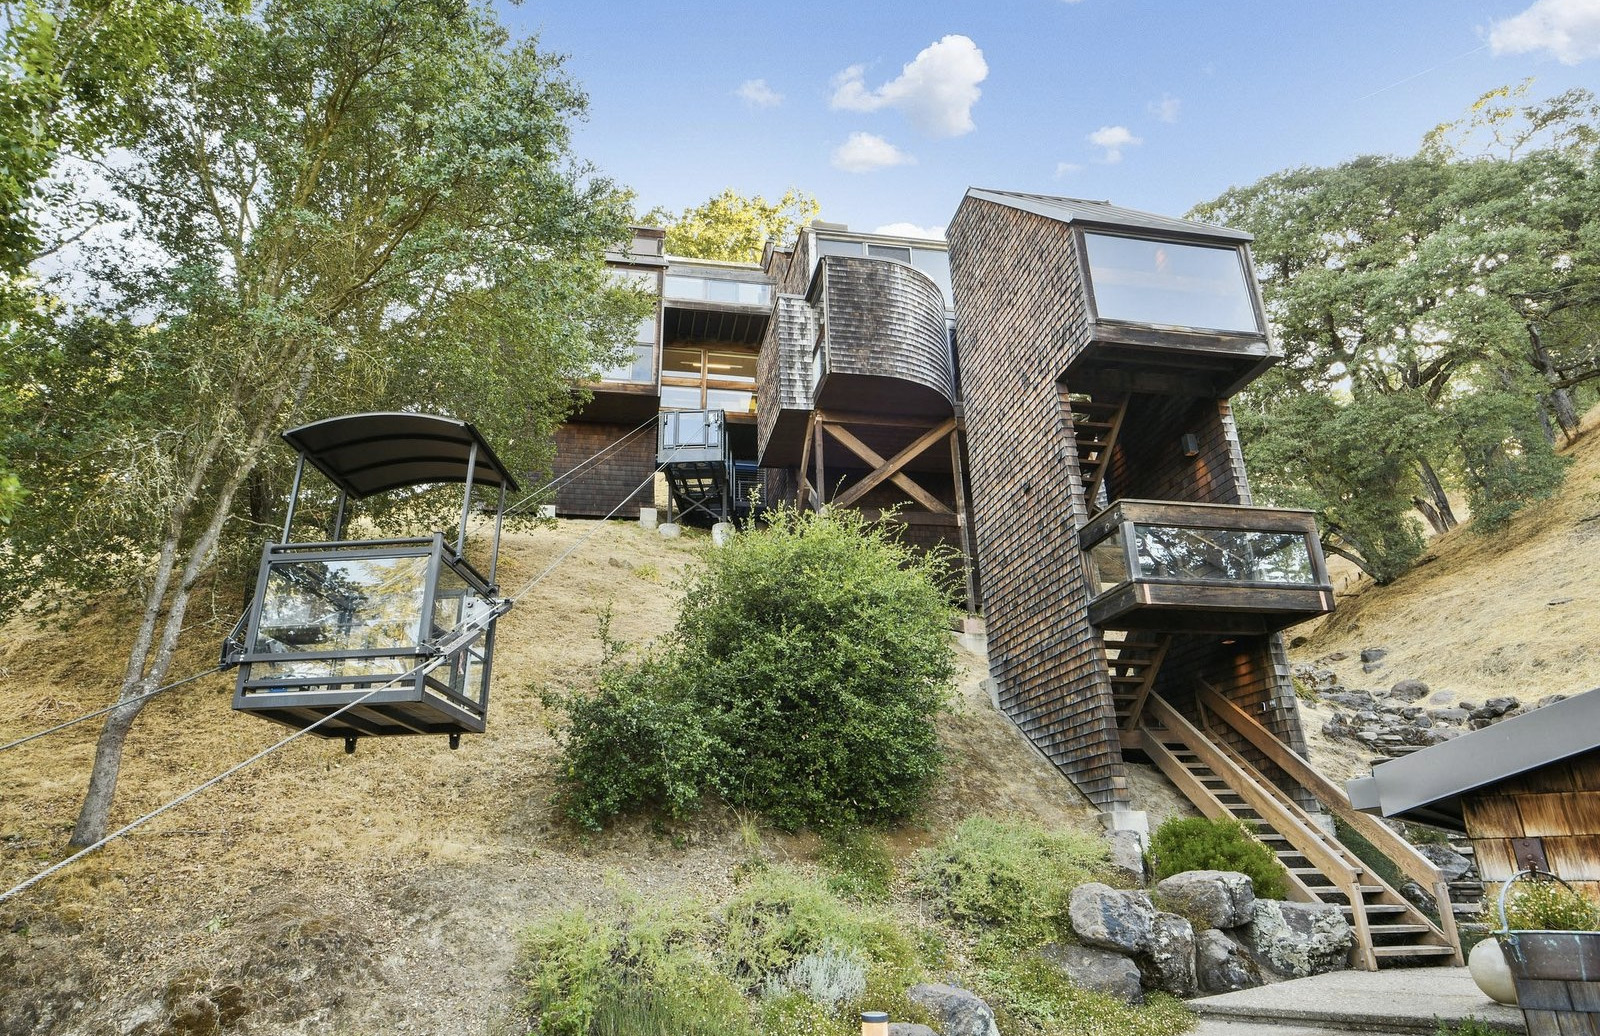 This Californian mountain home is peak '80s style – and it has a private cable car to boot